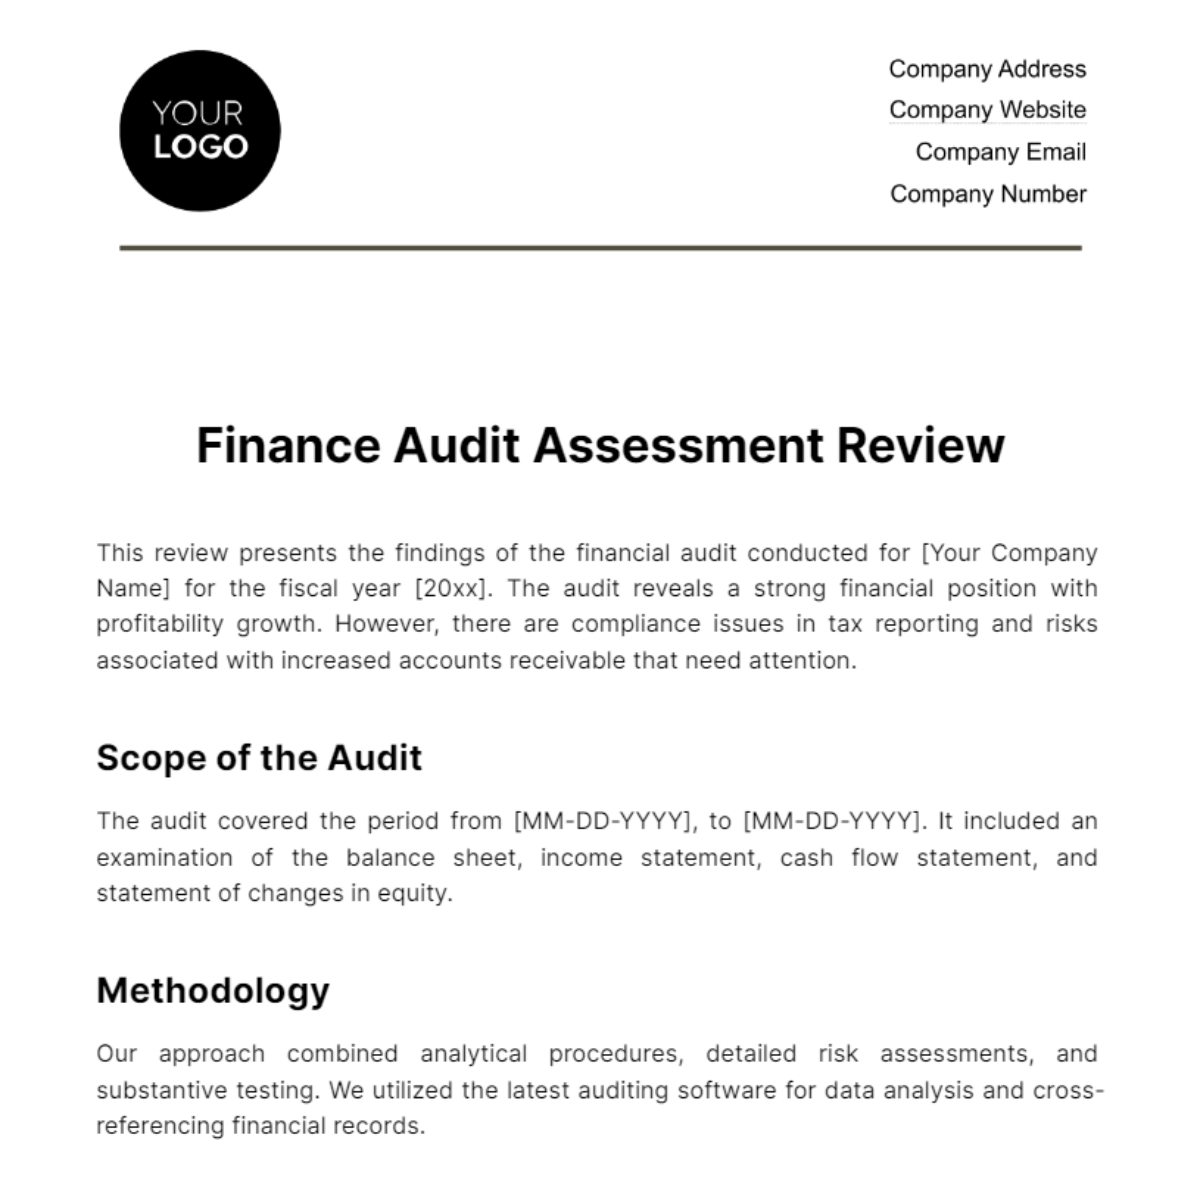 Free Finance Audit Assessment Review Template